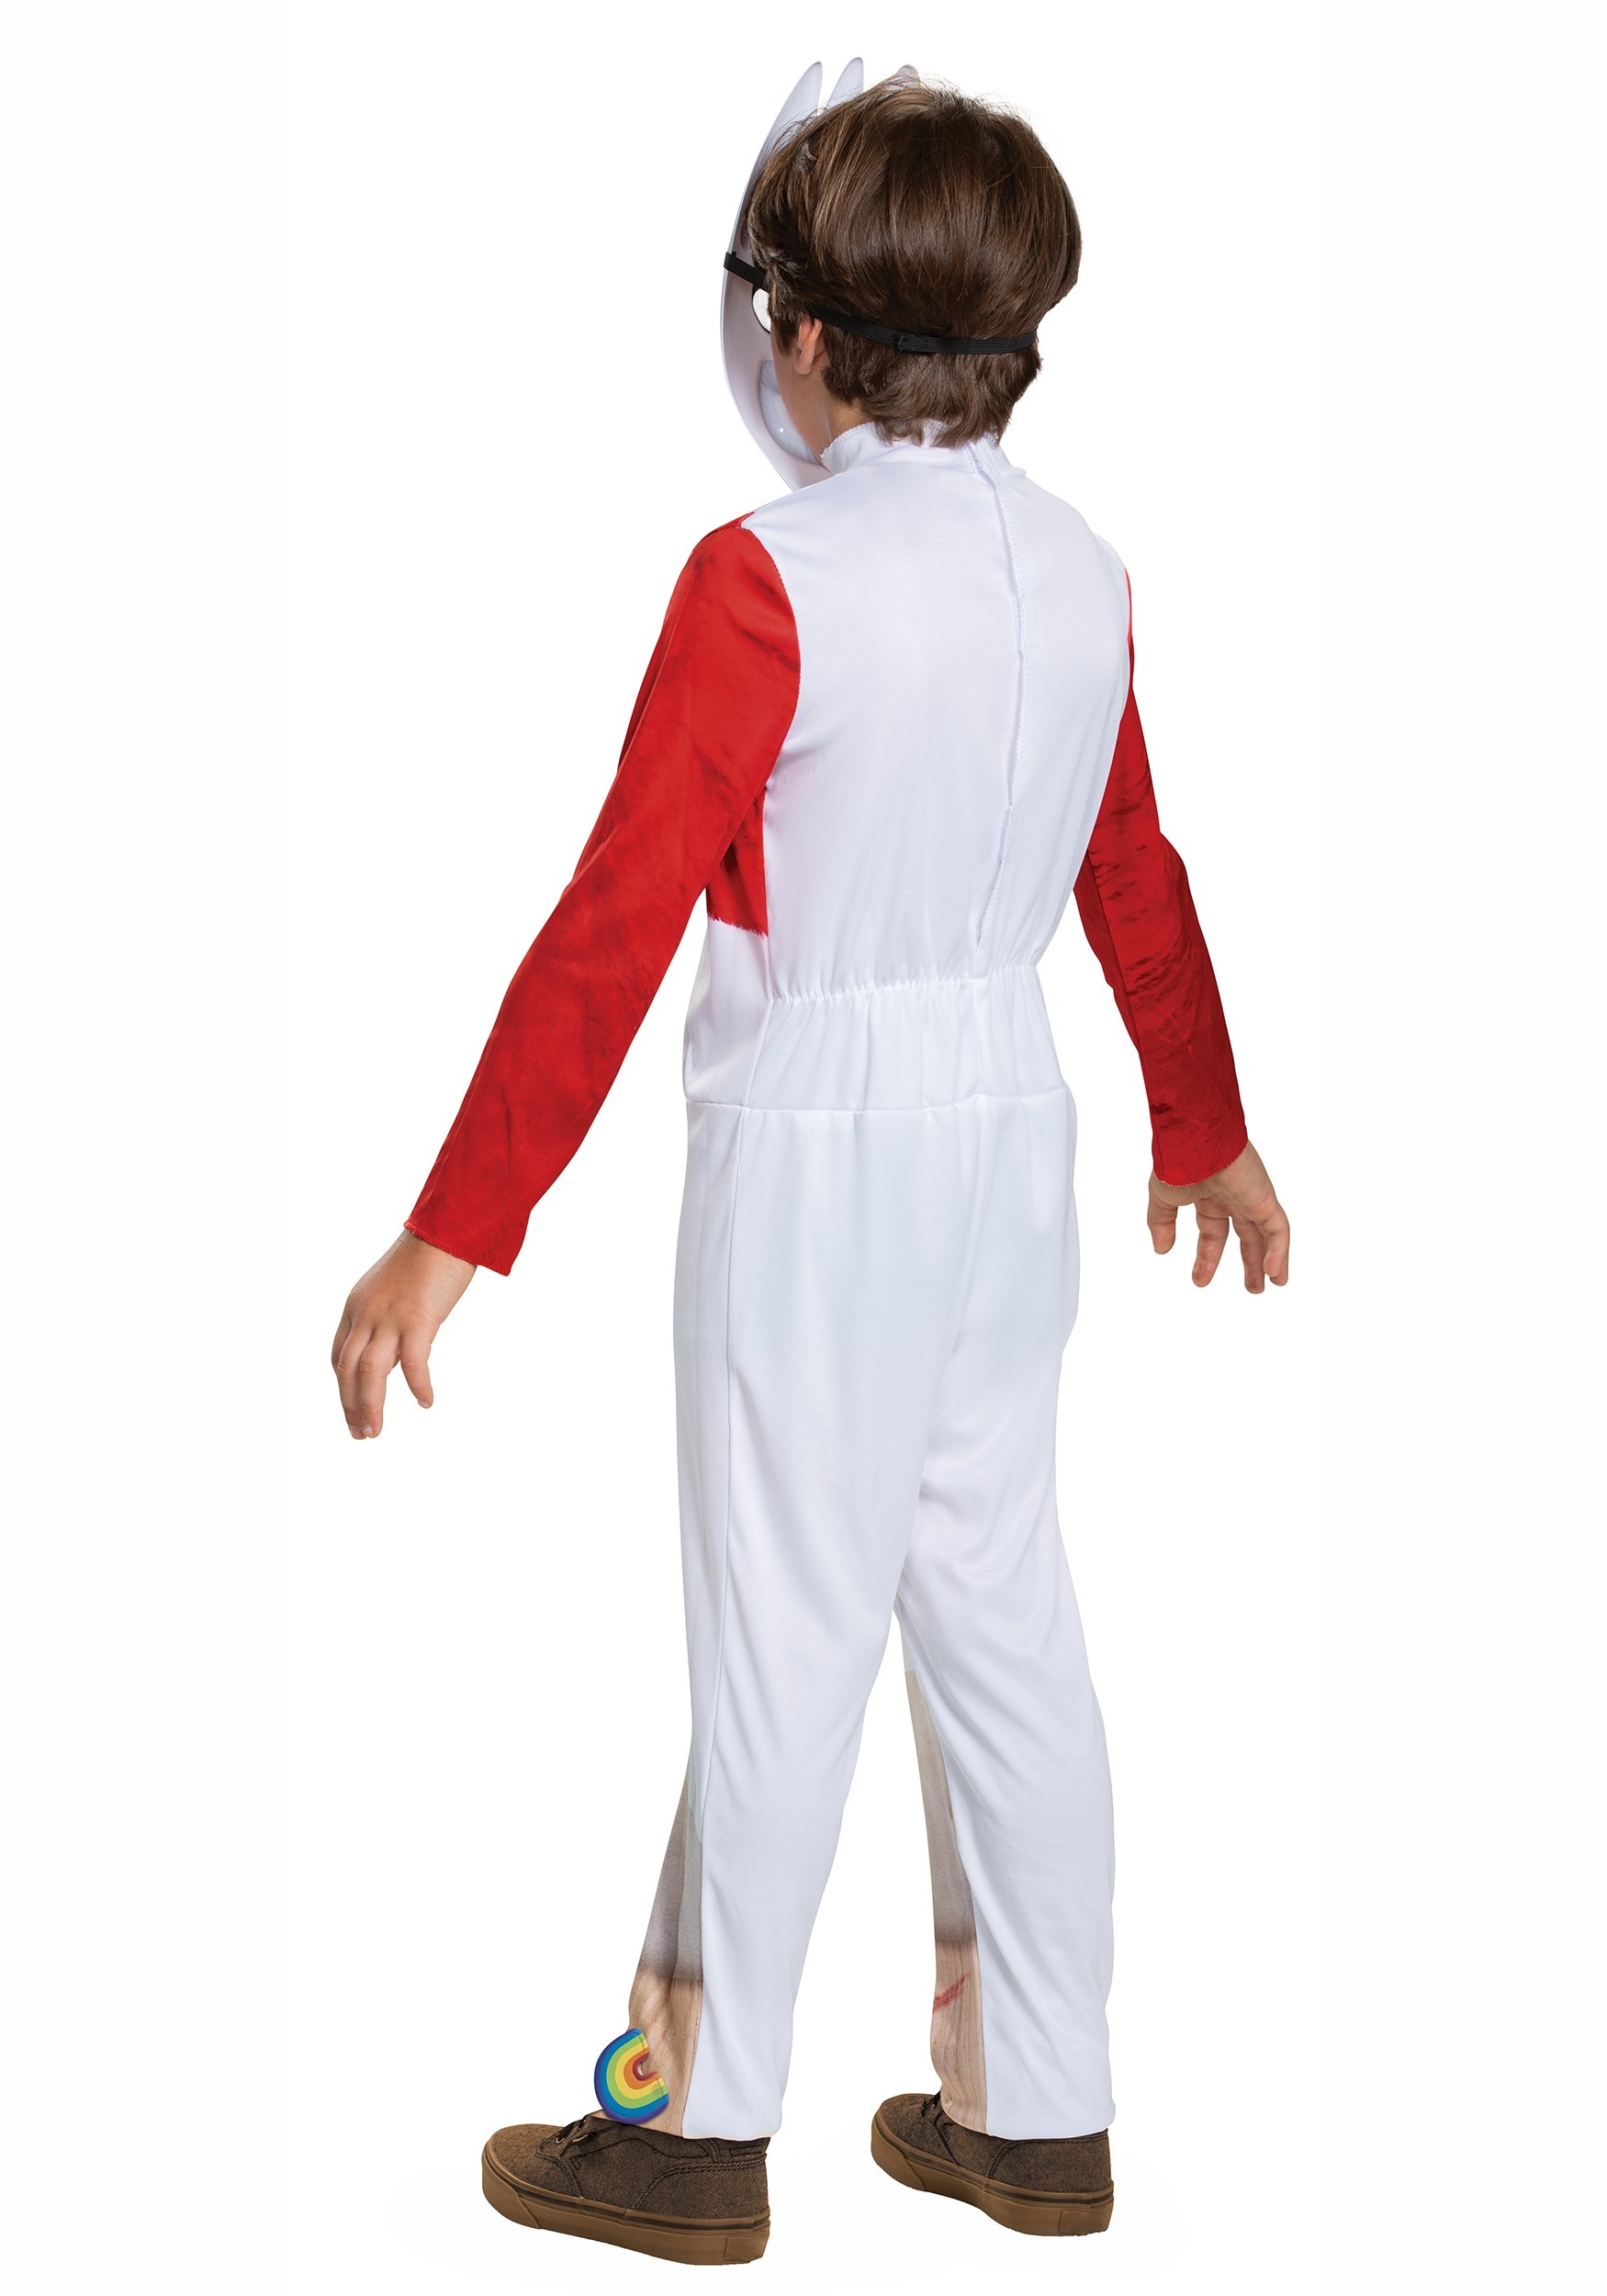 Toy Story Forky Classic Costume For Toddlers - Kids Forky Costume